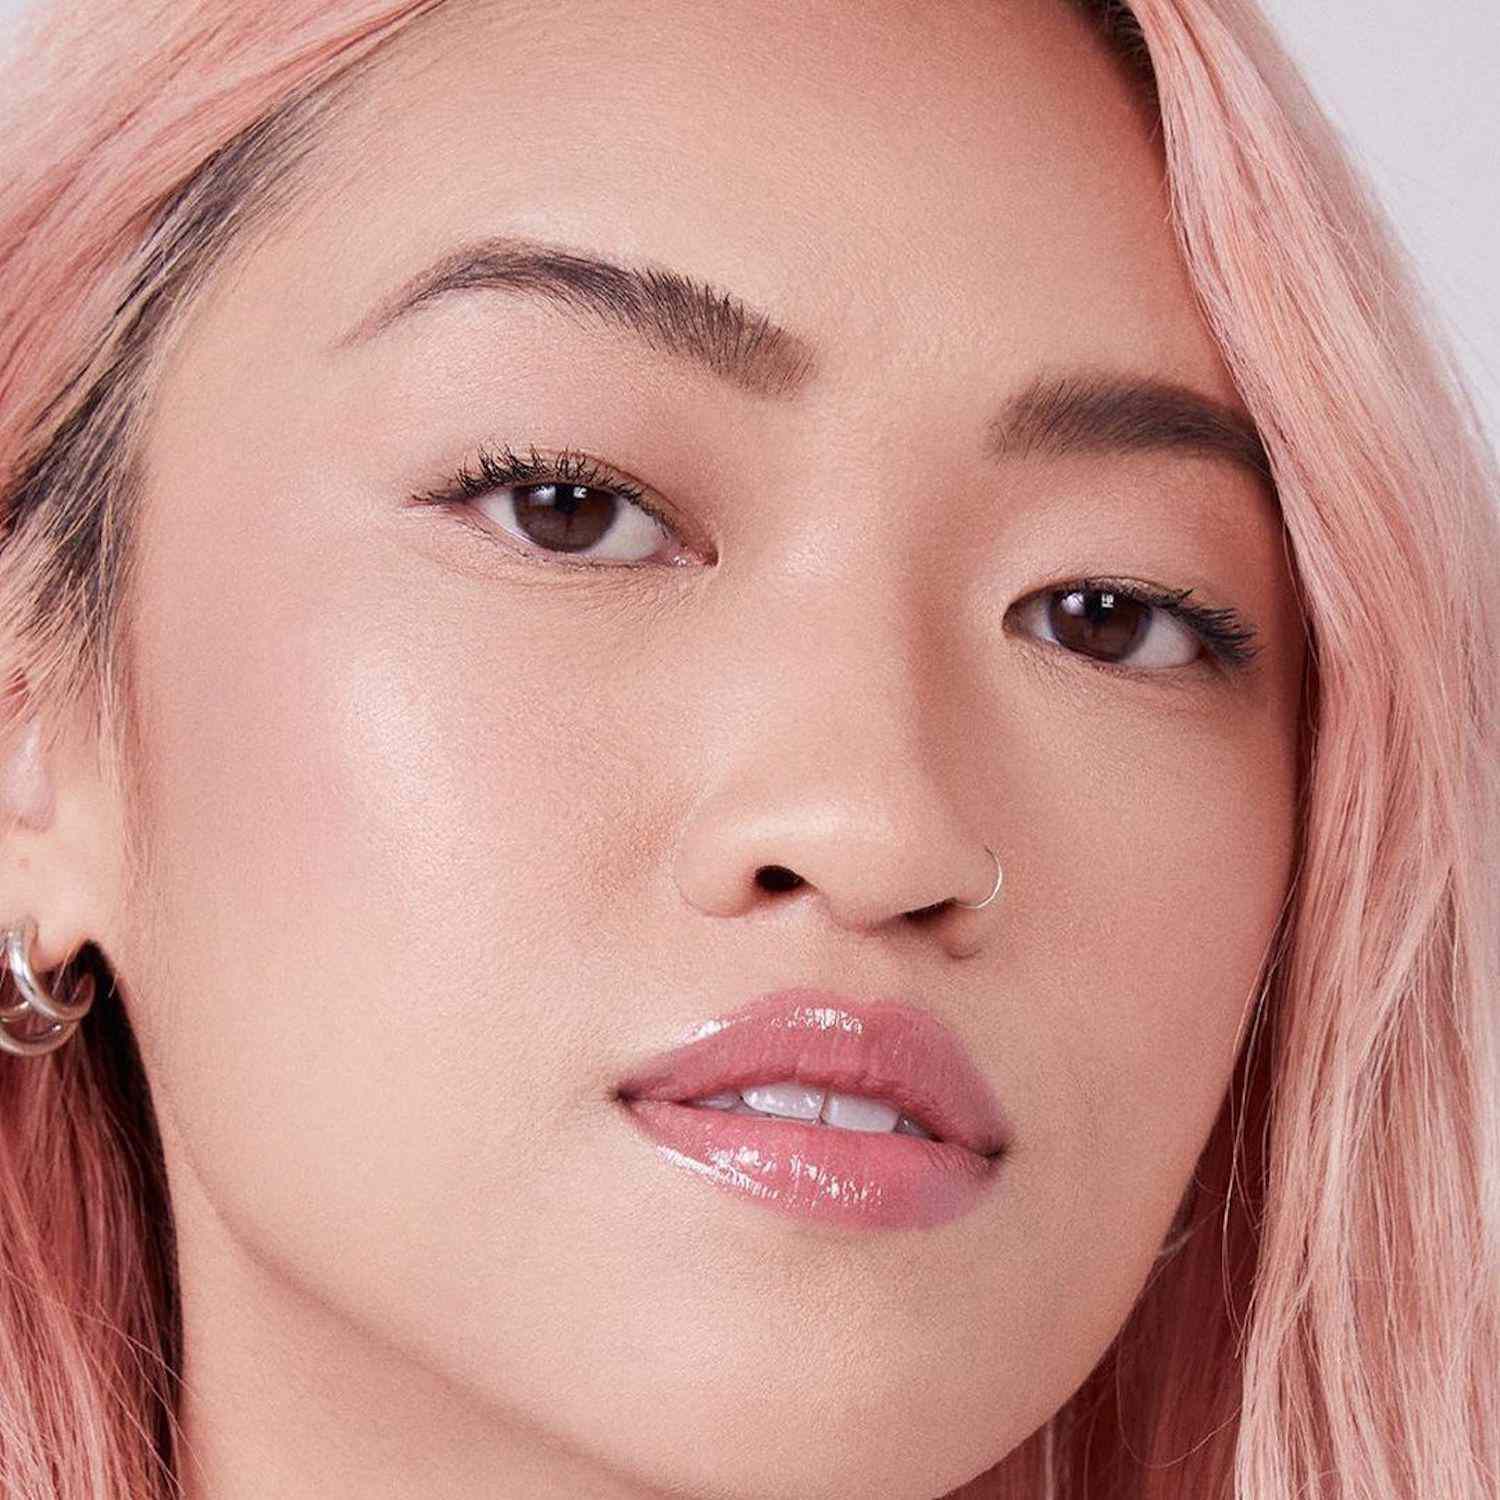 Woman with pink hair and dewy makeup look